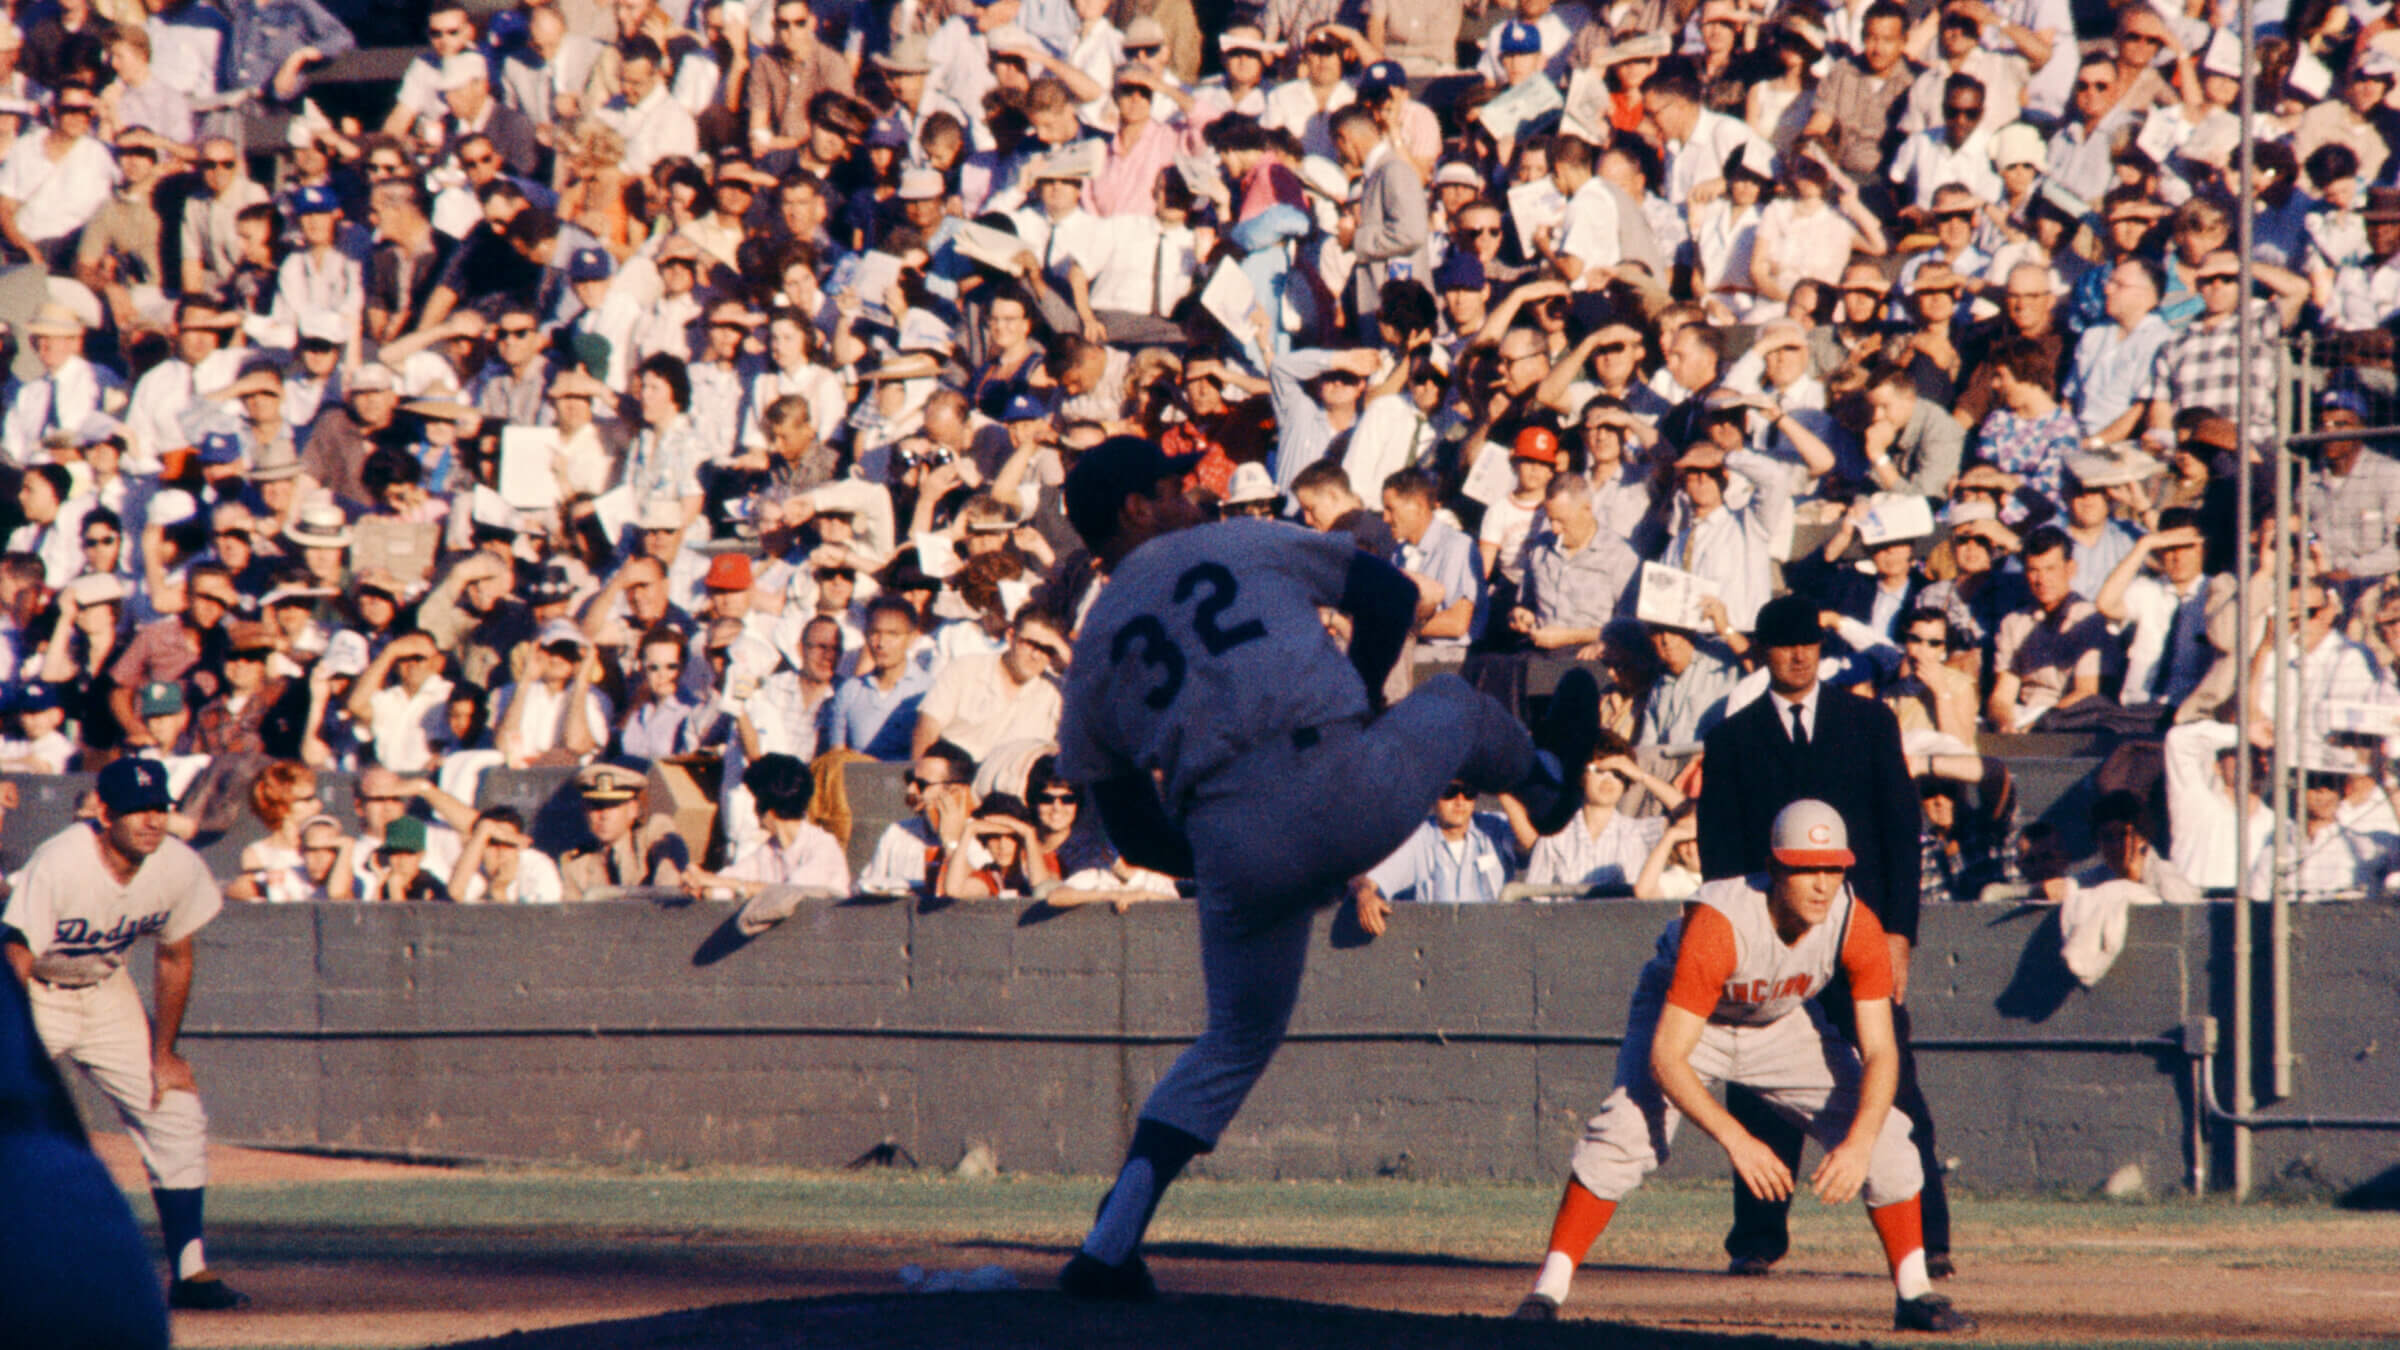 Sandy Koufax pitches during a 1961 game at the Los Angeles Memorial Coliseum. (Hy Peskin/Getty Images)